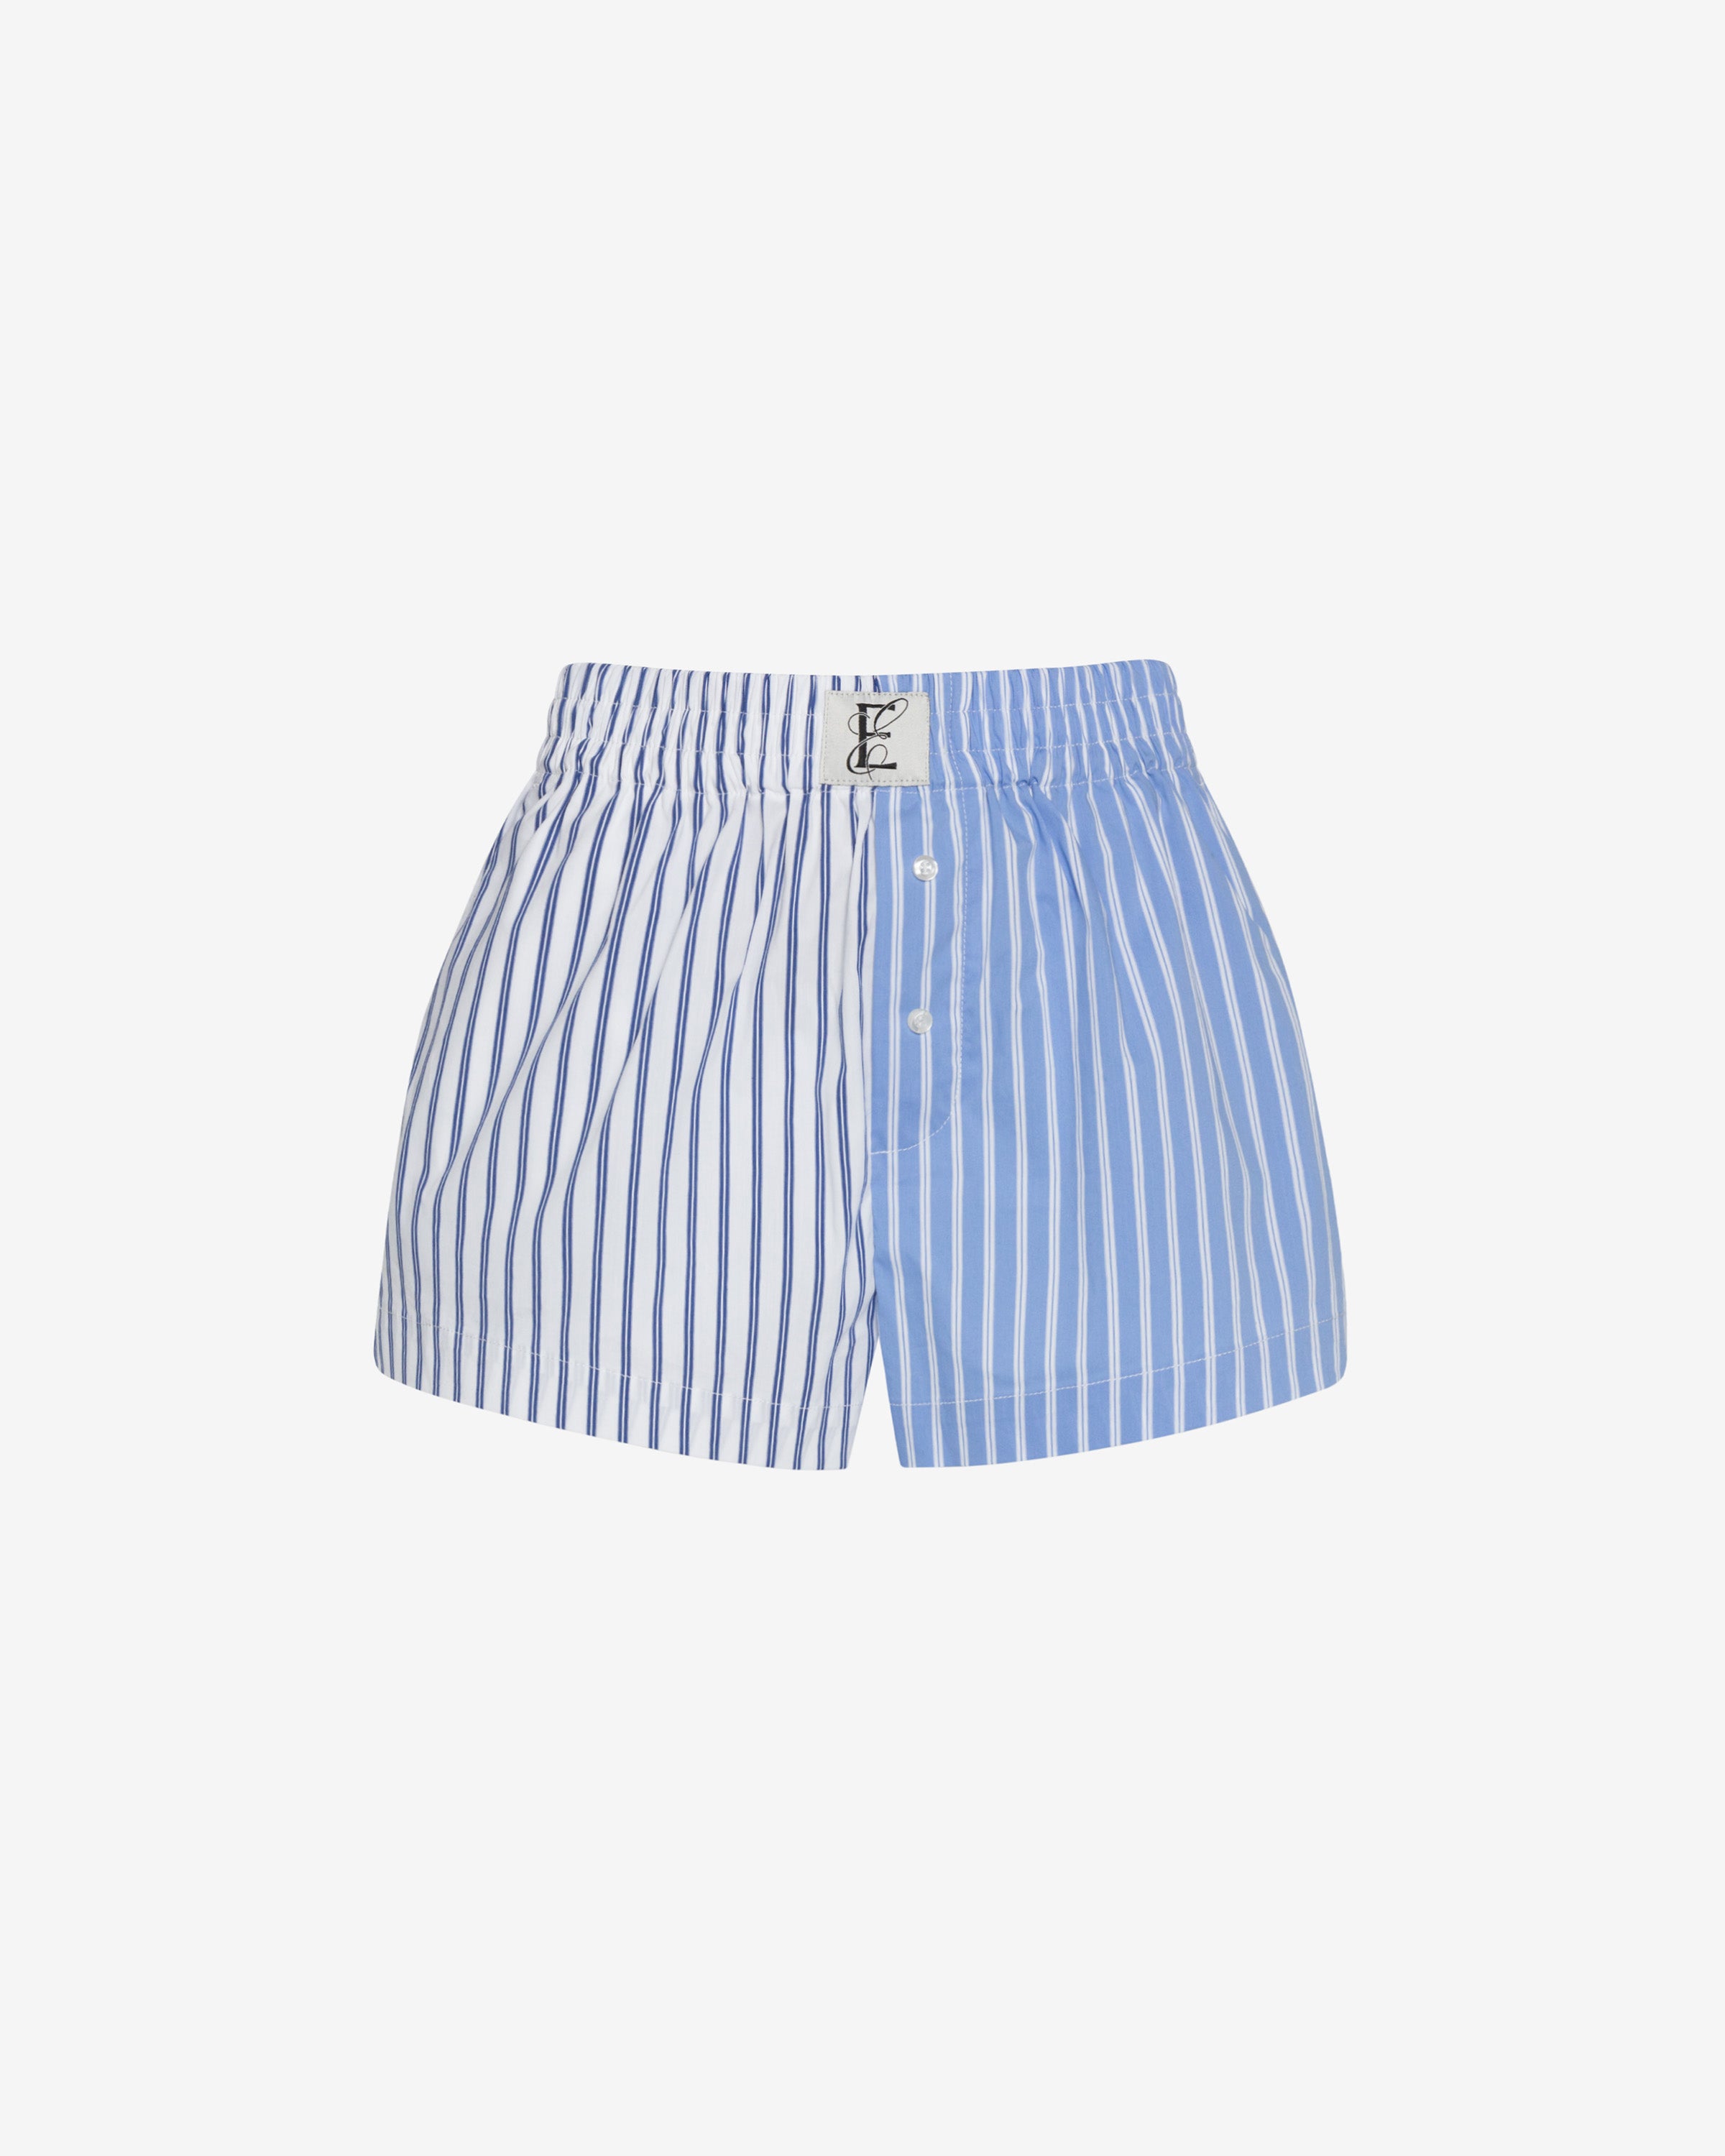 Duo Striped Boxer Short in Blue